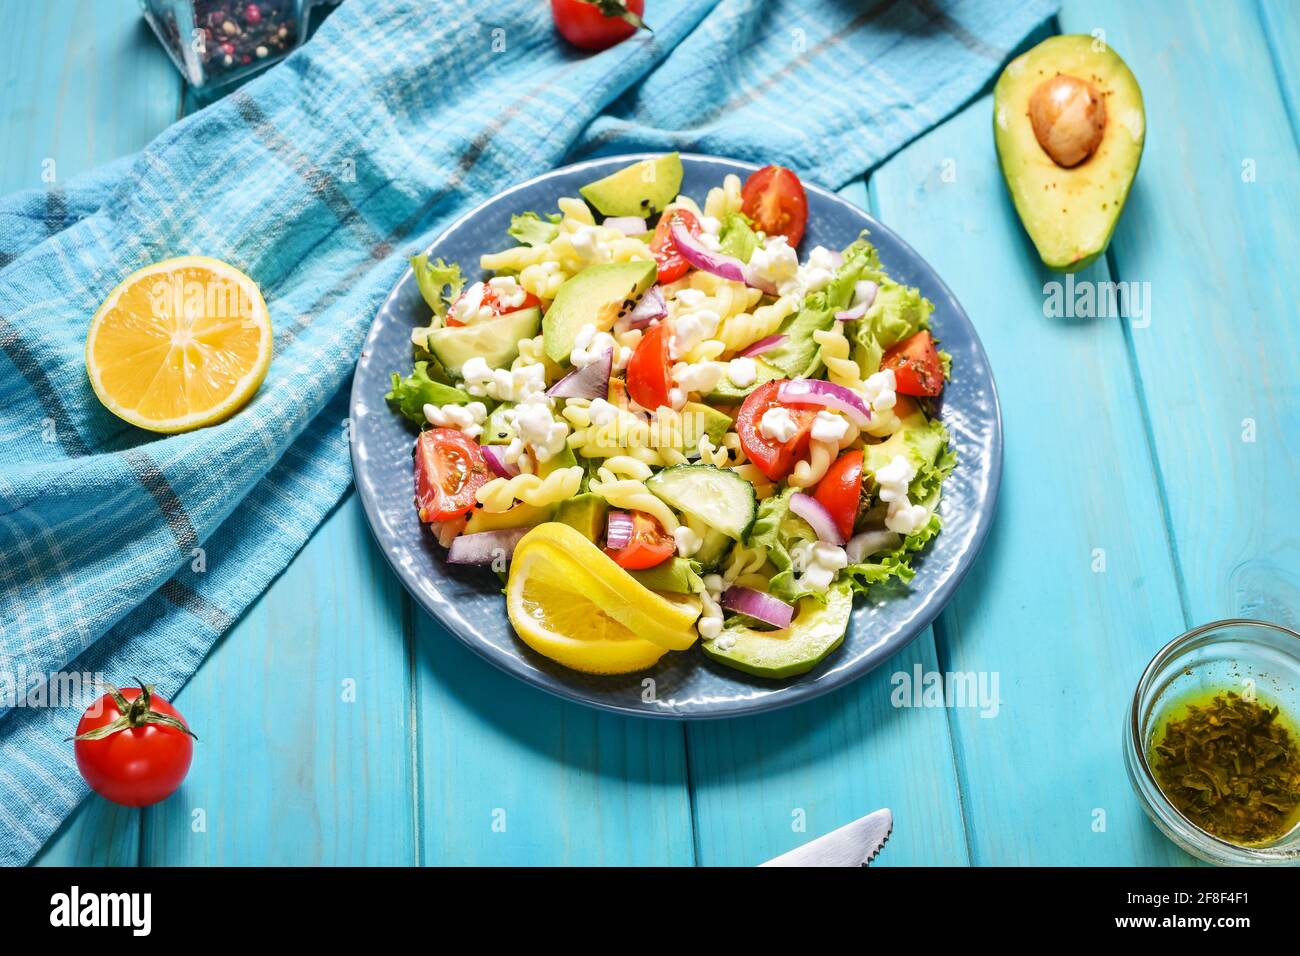 Vegetarian healthy lunch - pasta salad with fresh vegetables, avocado and feta on a blue wooden background Stock Photo